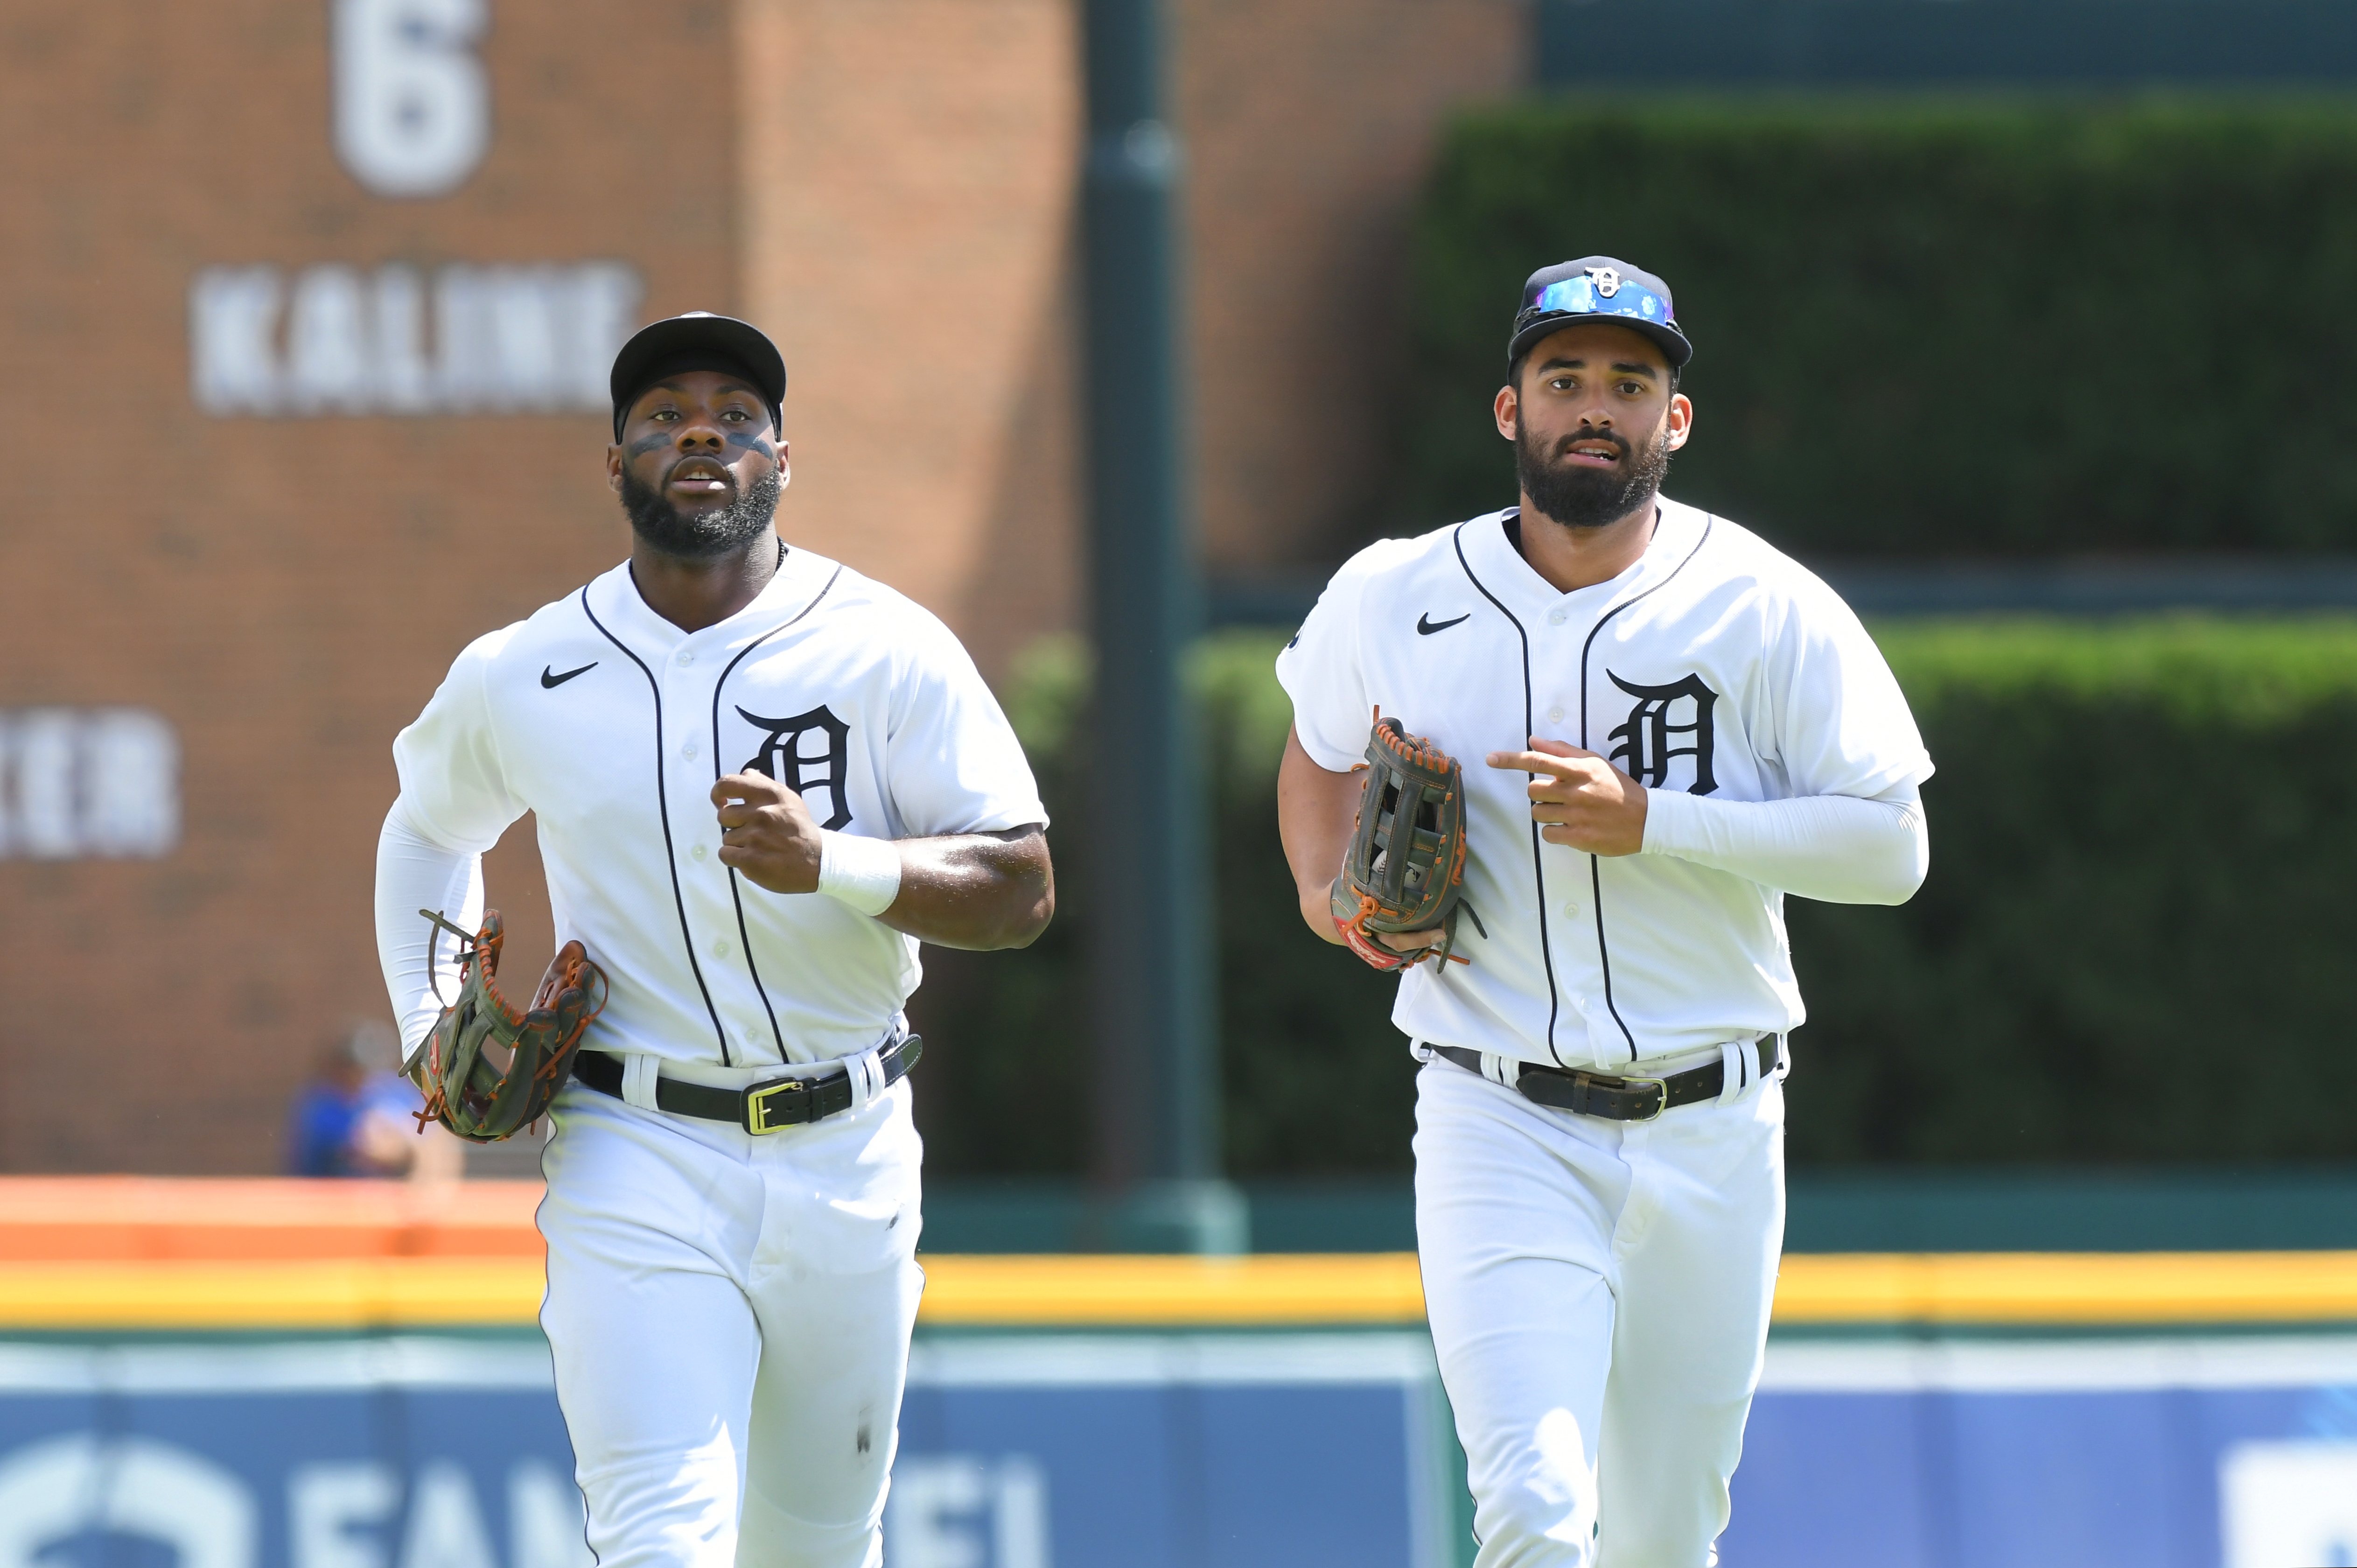 Detroit Tigers' Athletic Outfielder Akil Baddoo Was An Excellent